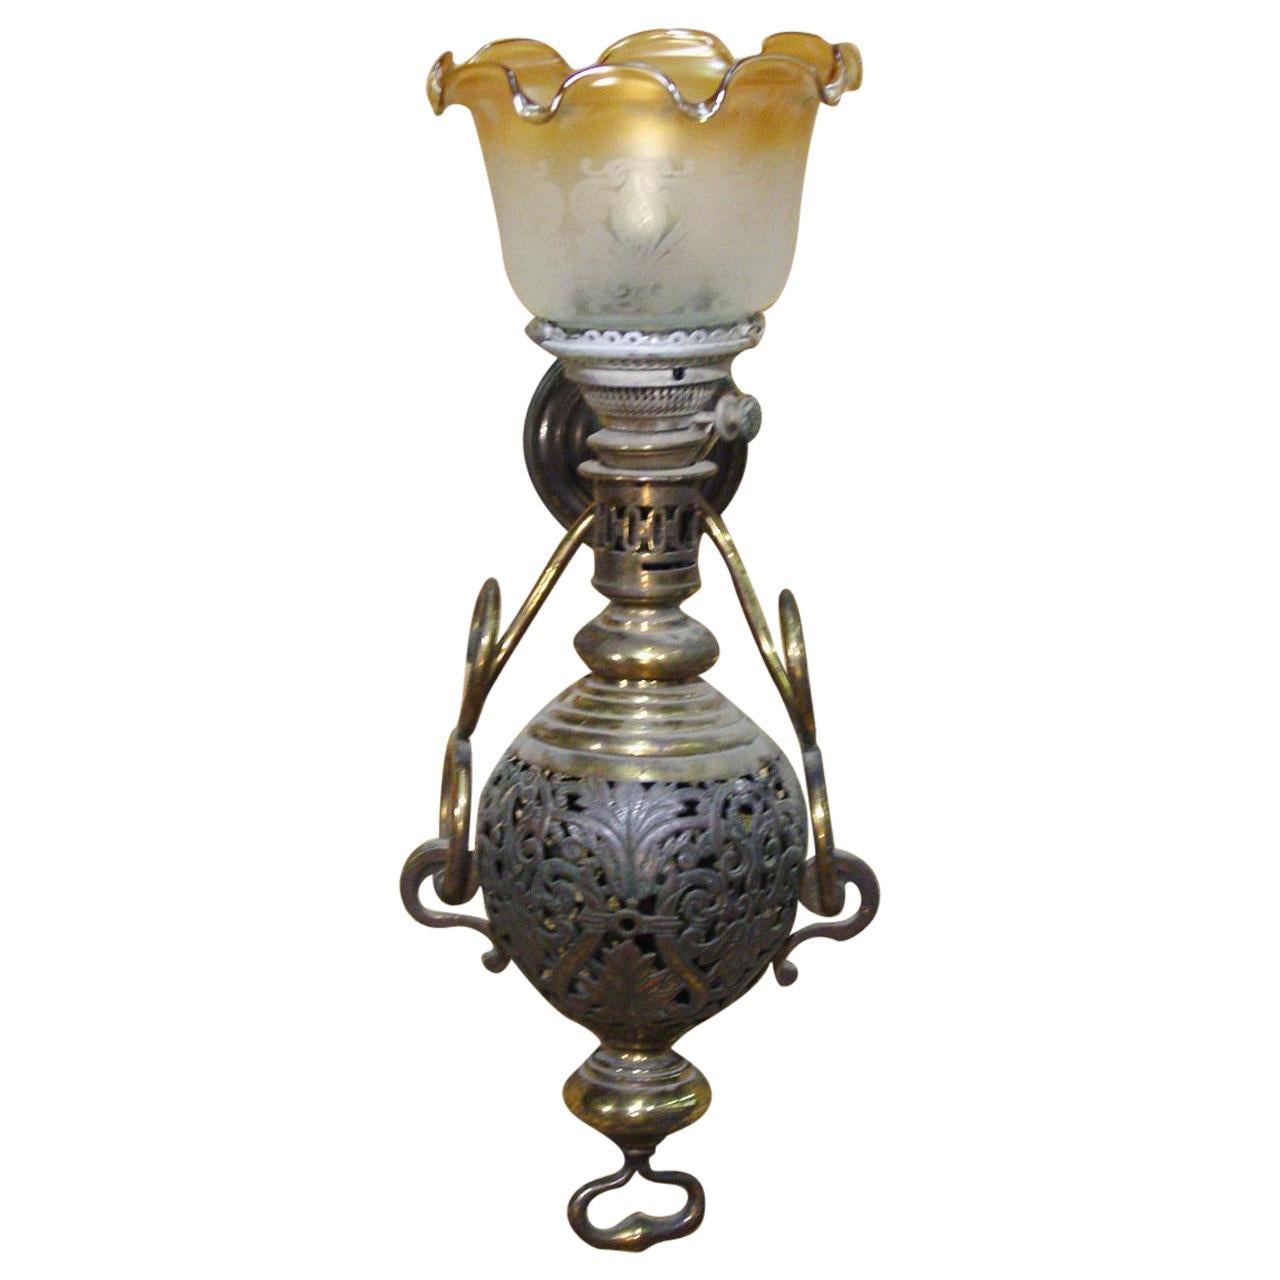 Pair of large Colonial style Hurricane lamps with gold tipped scalloped glass. The iron body of the lamp features floral scrolls and an iron key to adjust the gas. This sconce has been recently wired electrically.

 